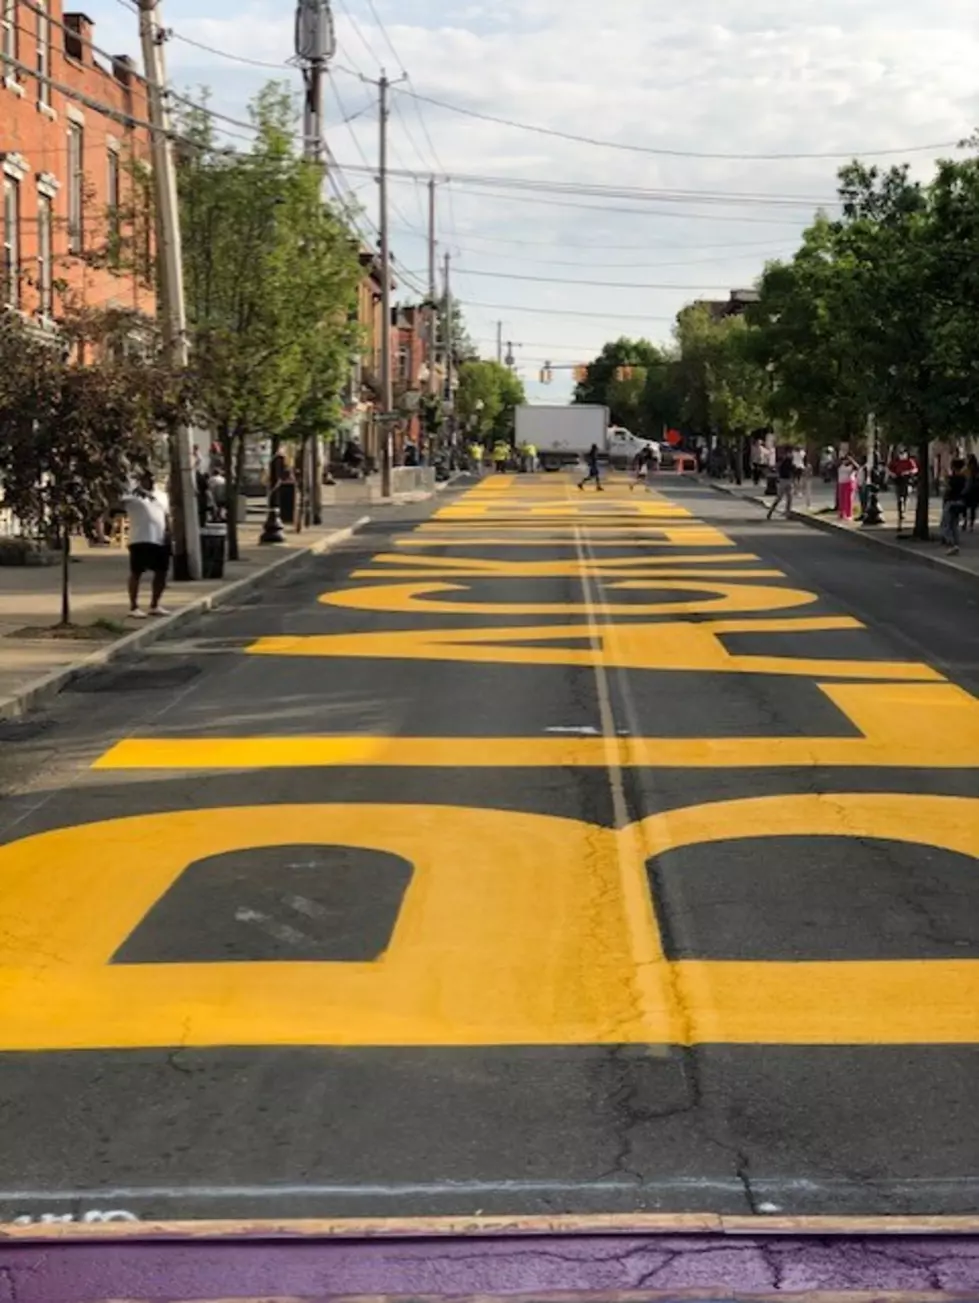 Albany’s Lark St. is Talking, Are You Listening?